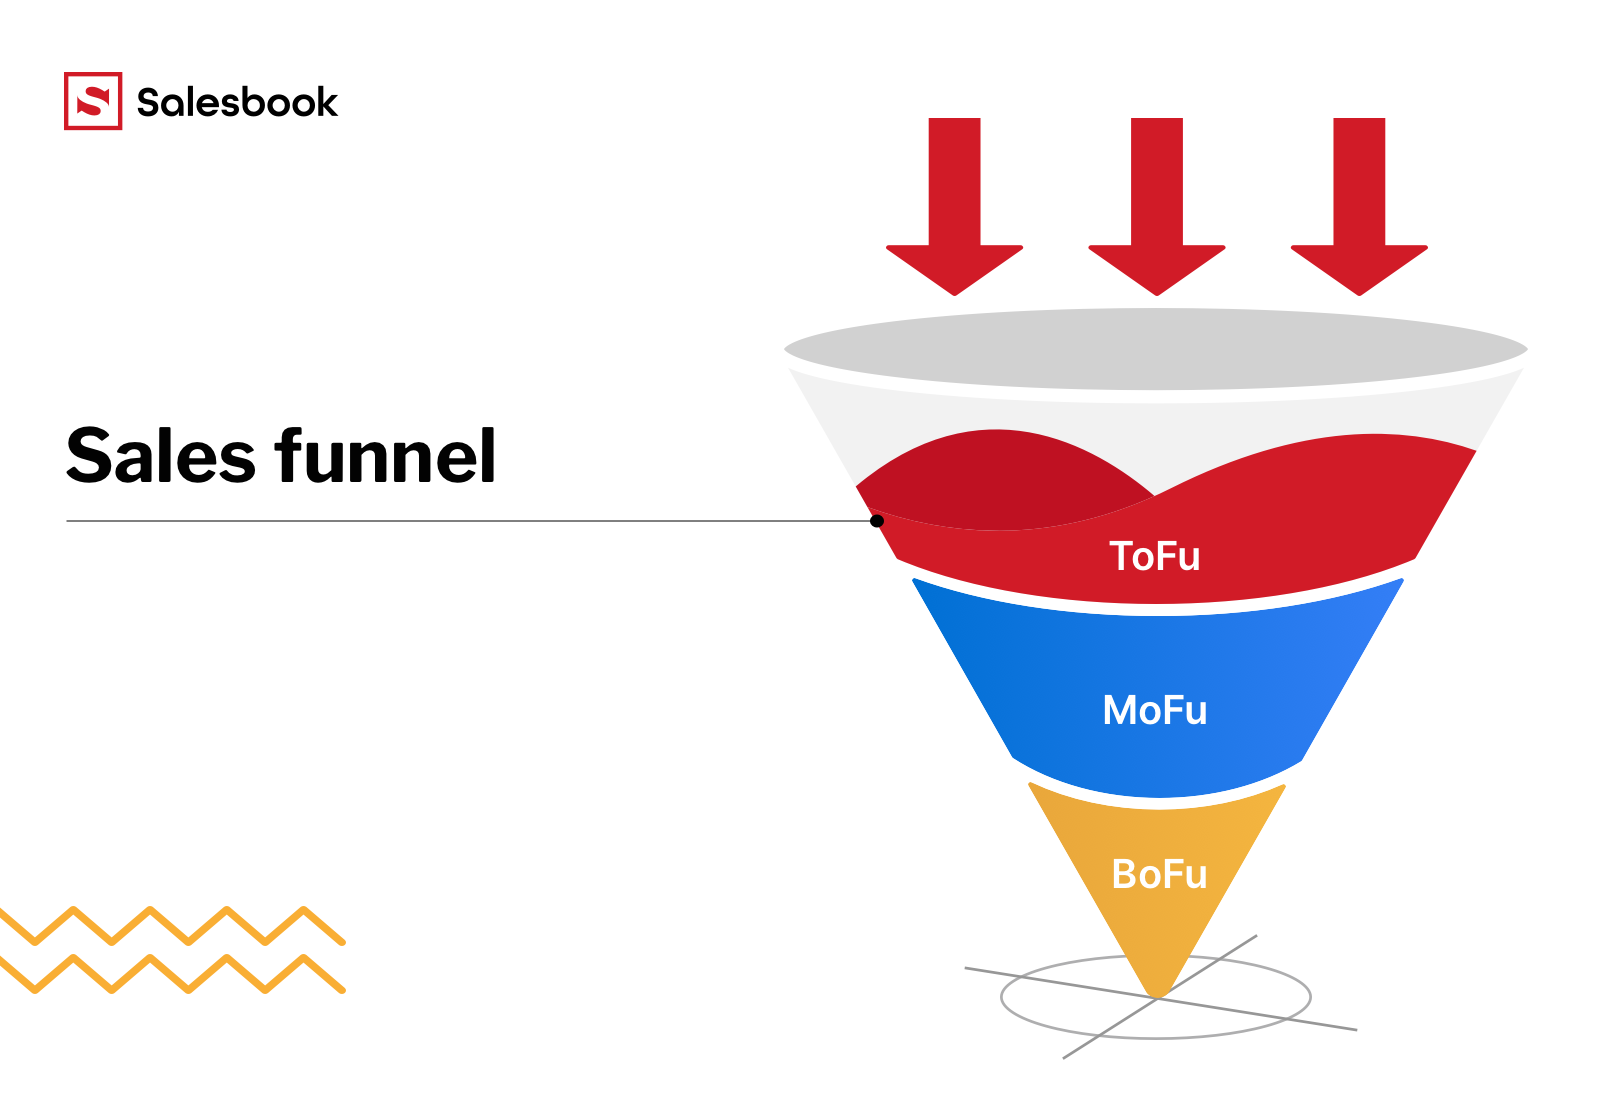 Fig. 7. The general sales funnel model and its stages.